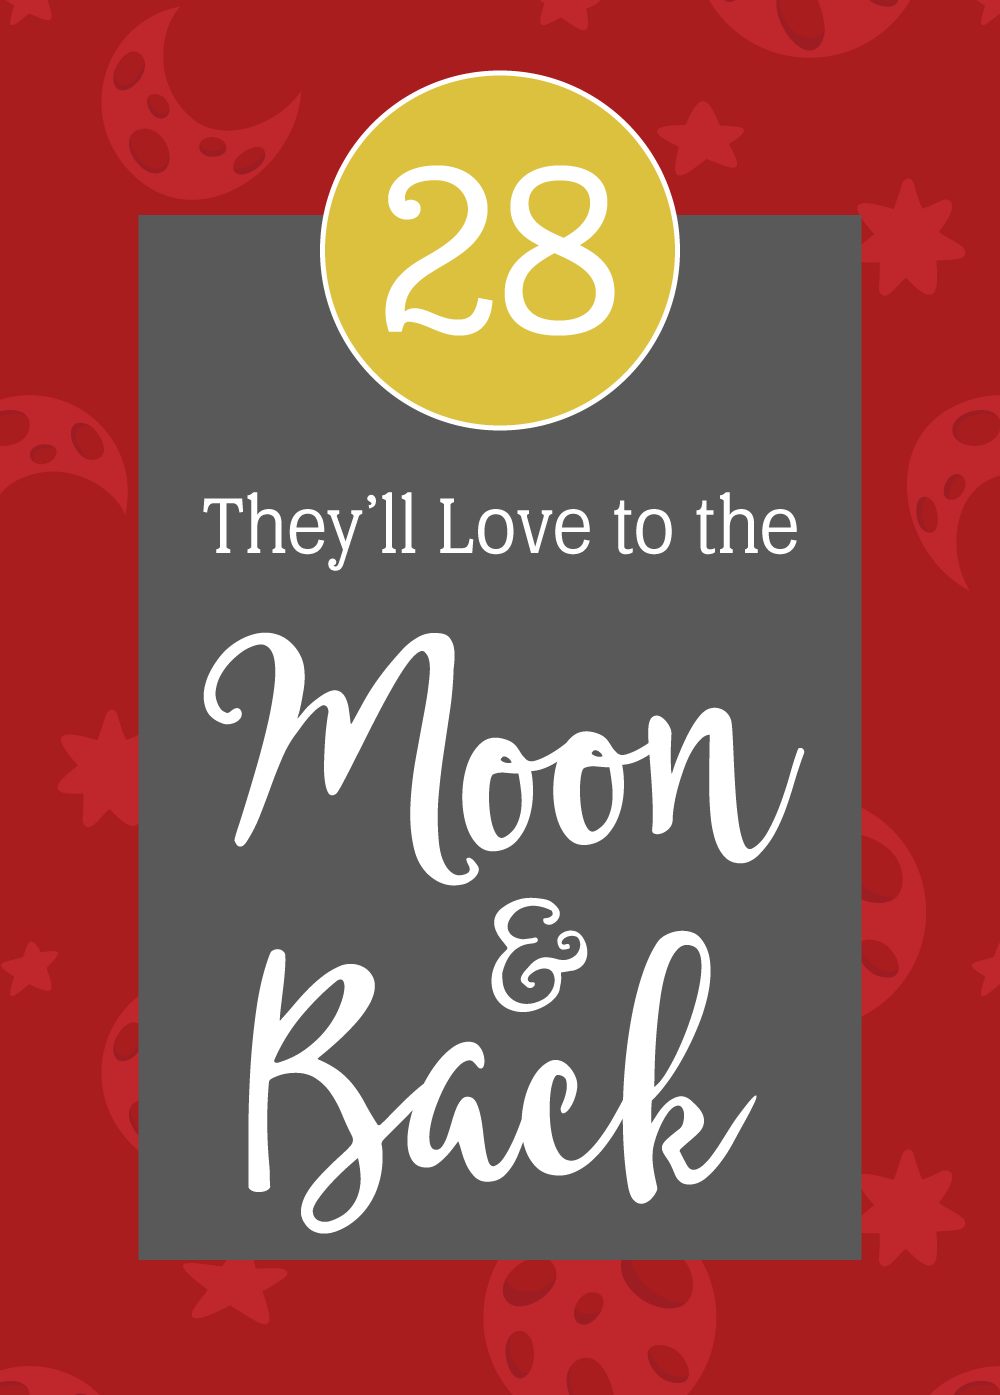 Red background with a moon pattern and a white text overlay that reads "28 Gifts They'll Love to the Moon & Back"